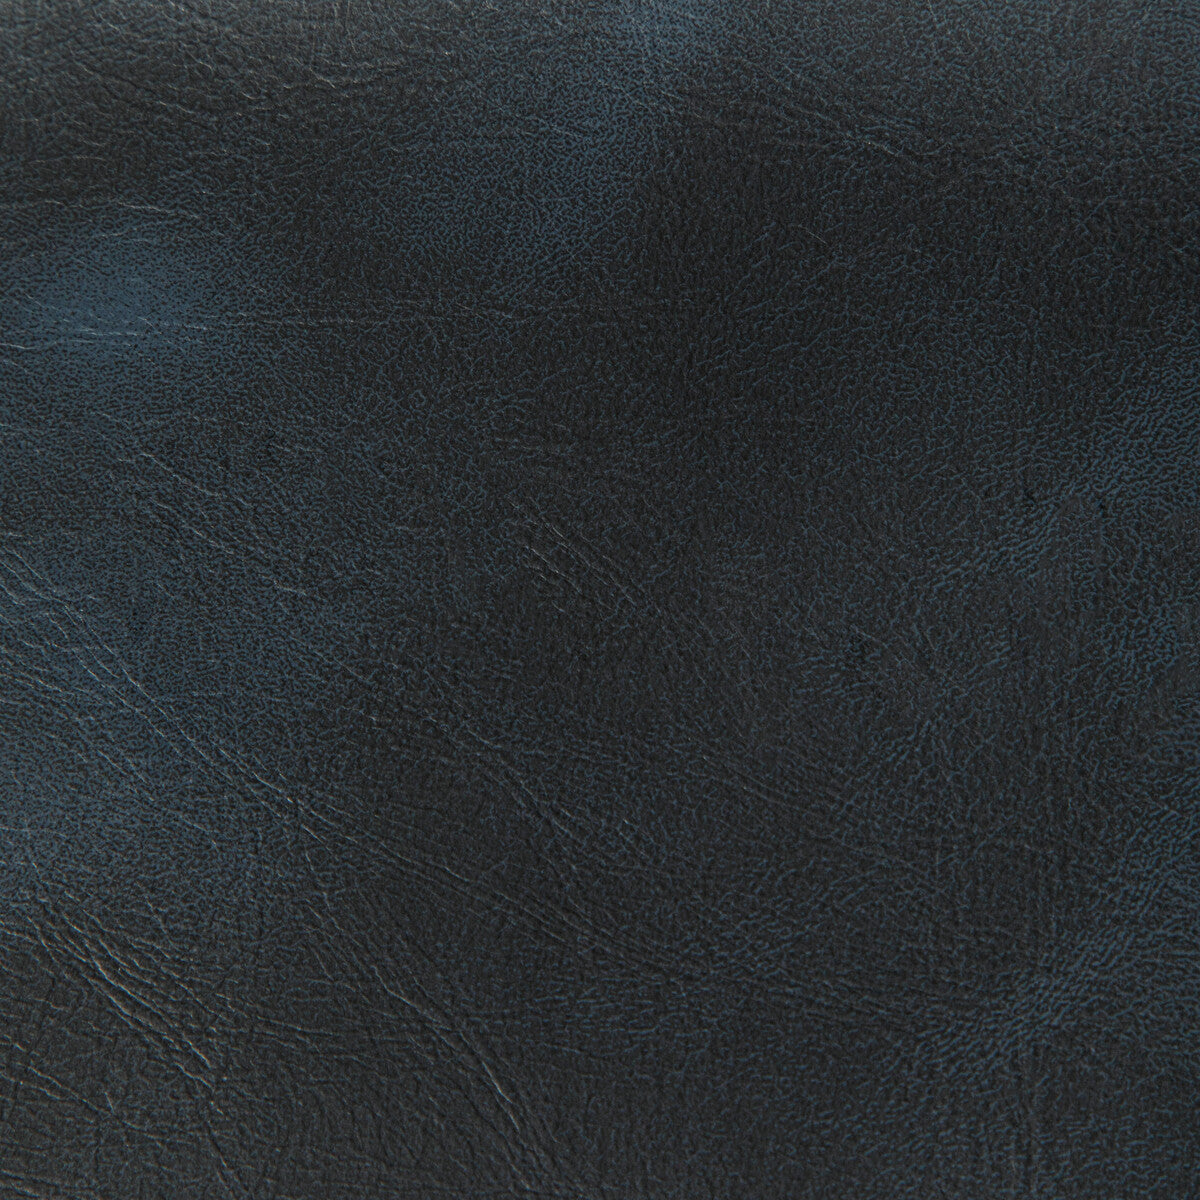 Rambler fabric in thunder color - pattern RAMBLER.5555.0 - by Kravet Contract